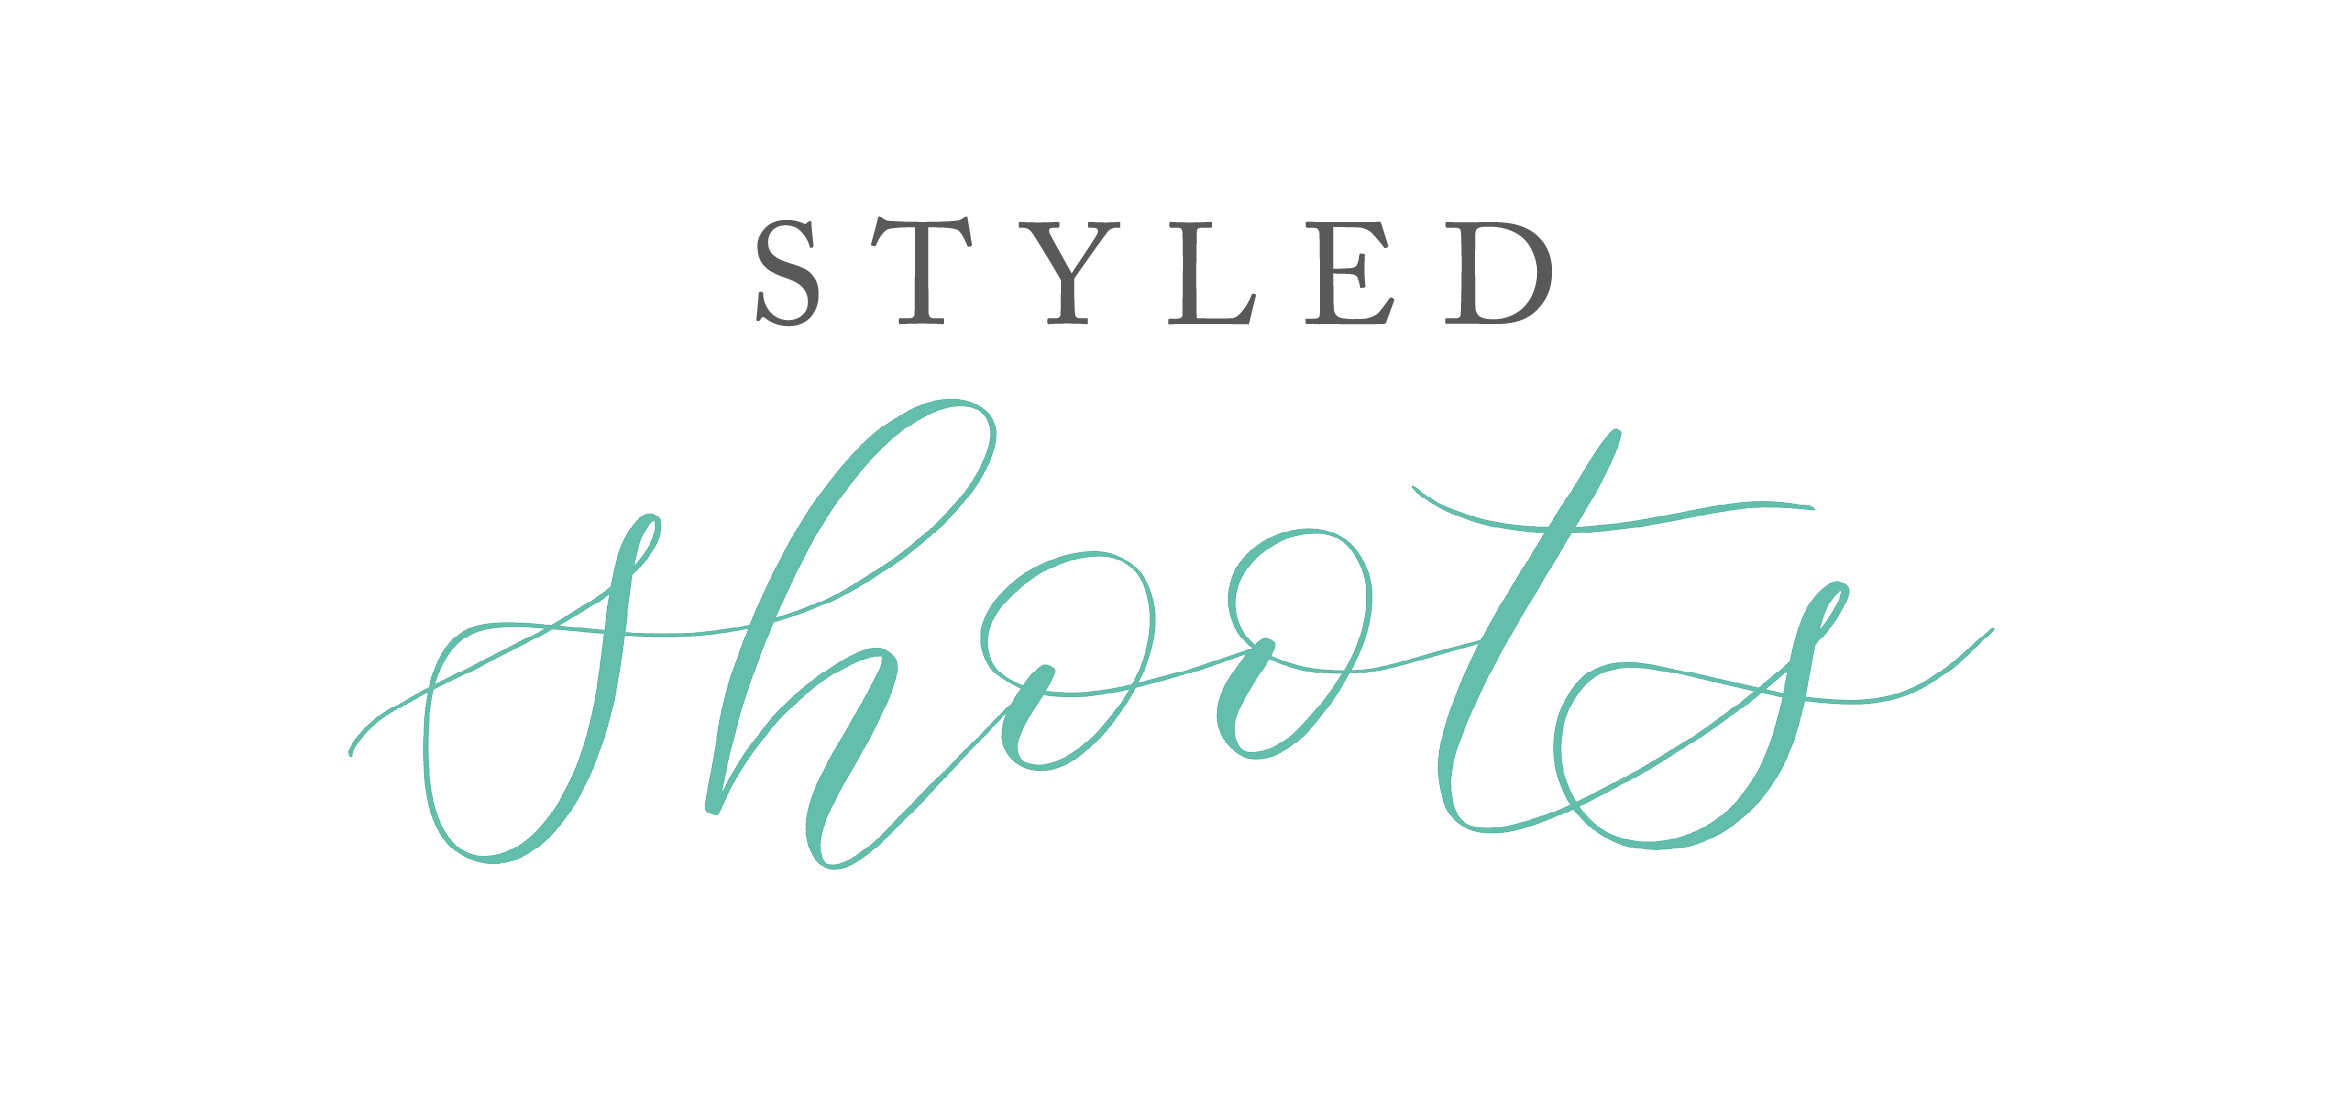 styled shoots